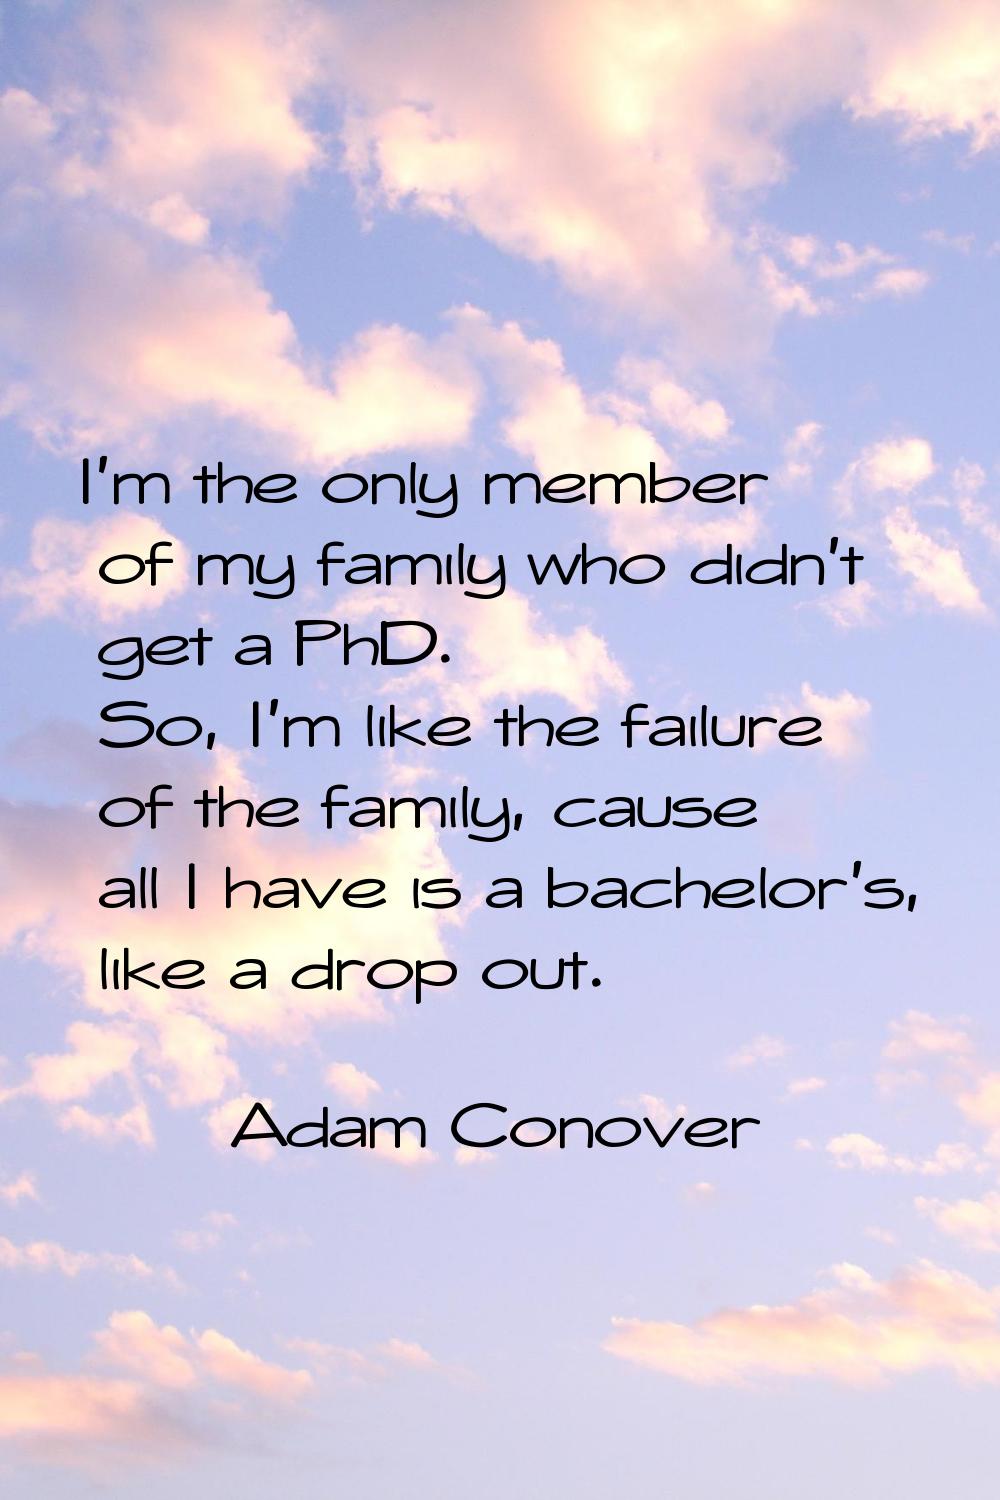 I'm the only member of my family who didn't get a PhD. So, I'm like the failure of the family, caus